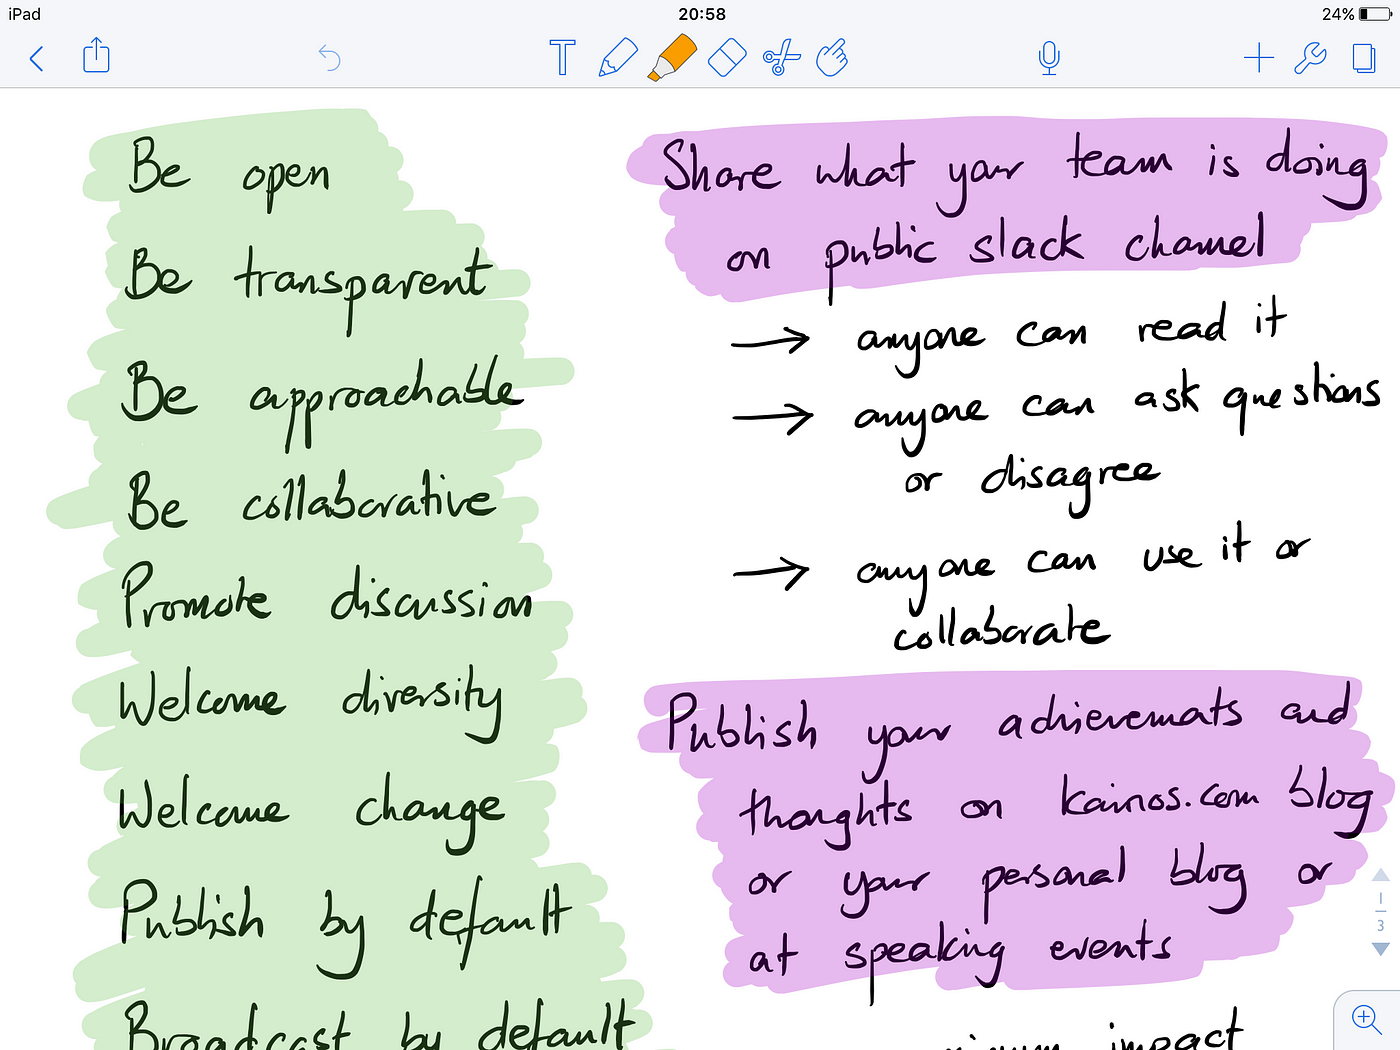 Best iPad apps for Apple Pencil: 16 brilliant art/note-taking apps